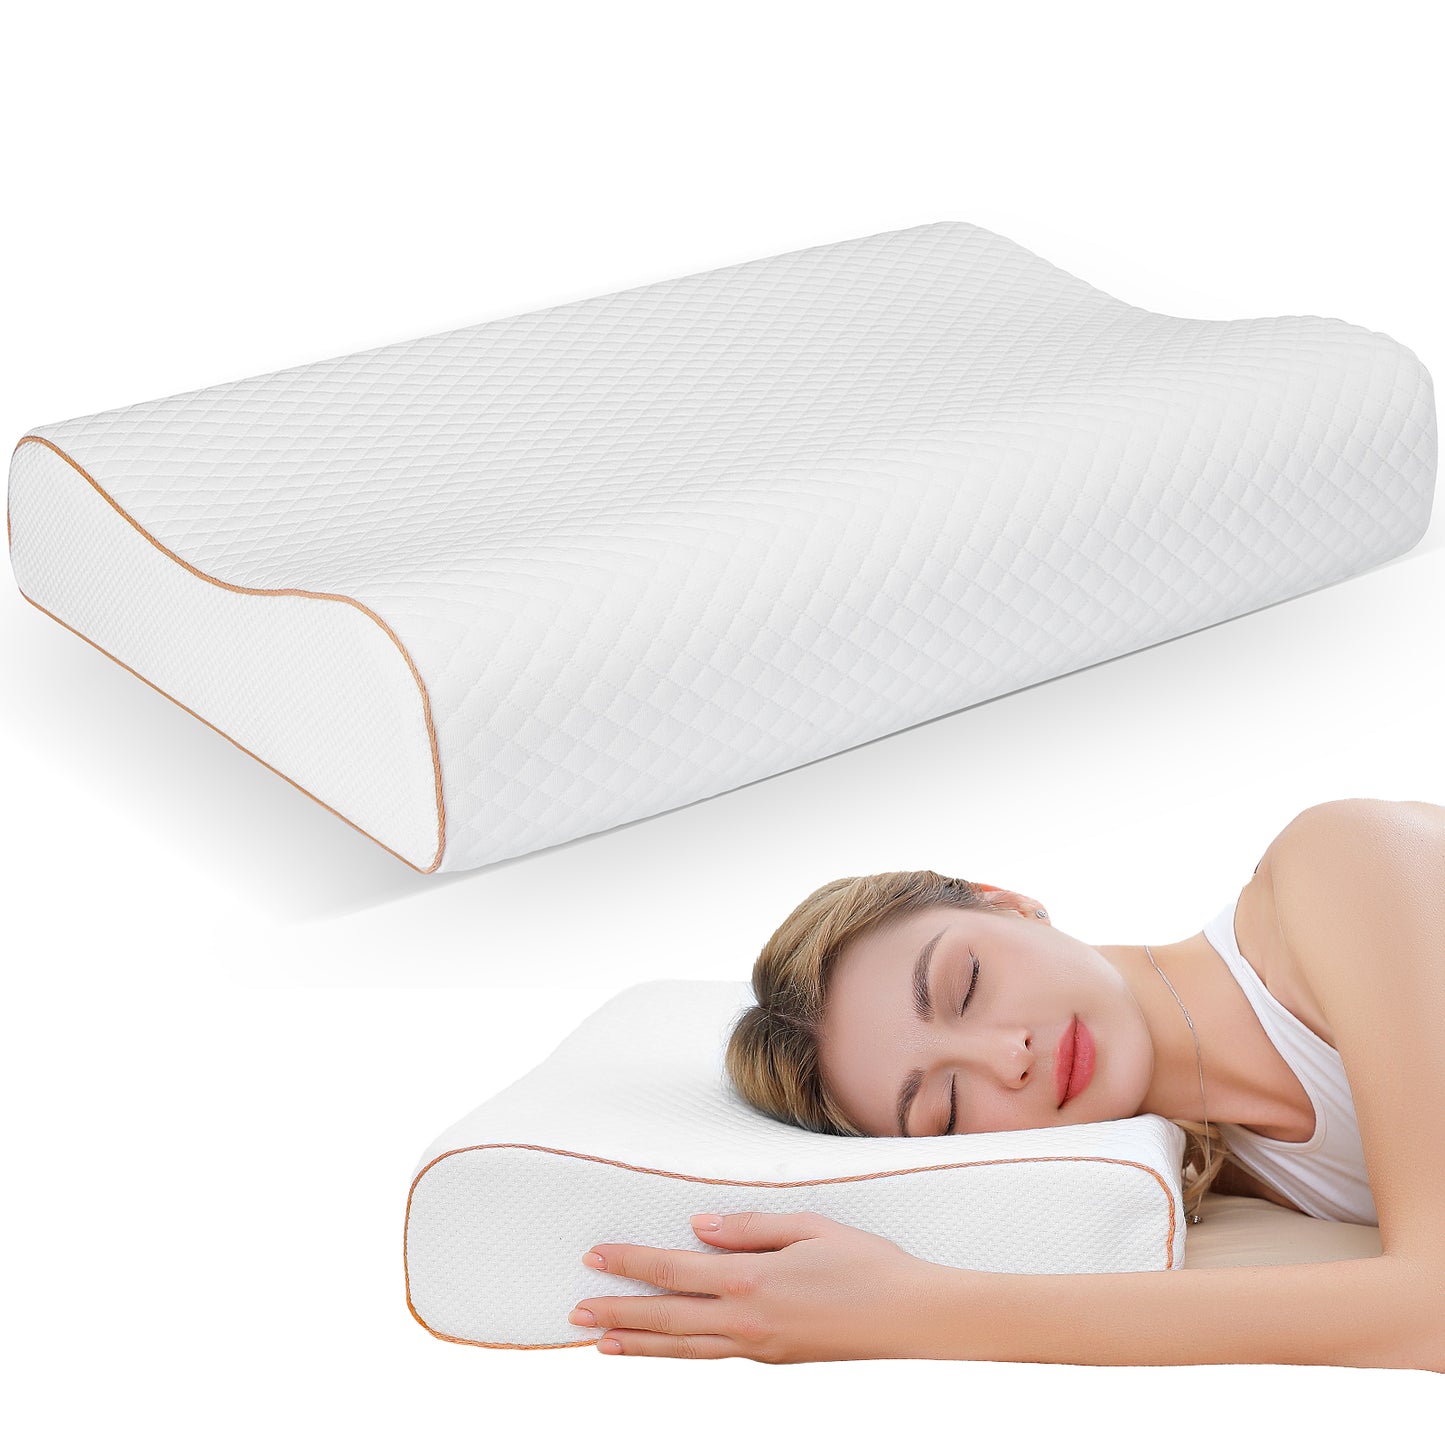 Tealhome Cervical Memory Foam Ergonomic Bed Pillow T227